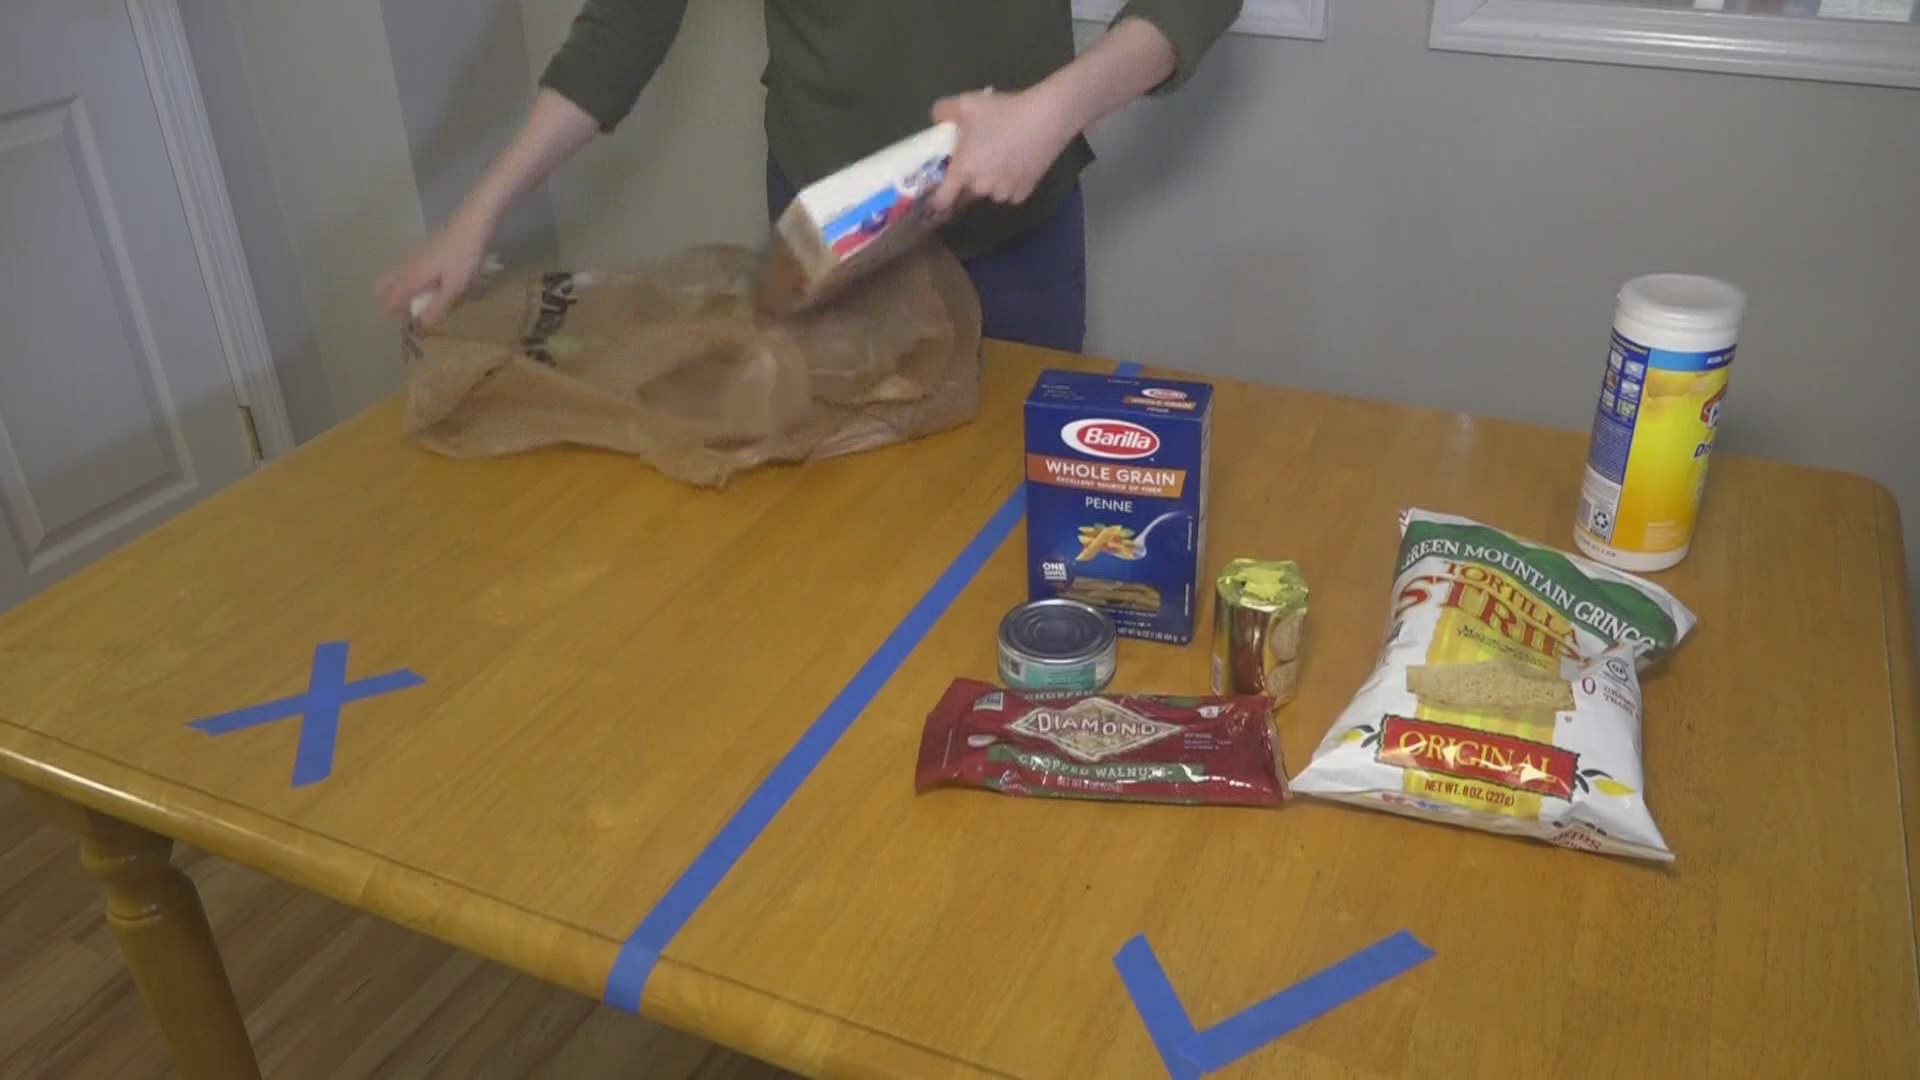 Learn how to keep your groceries, surfaces, and belongings virus free.